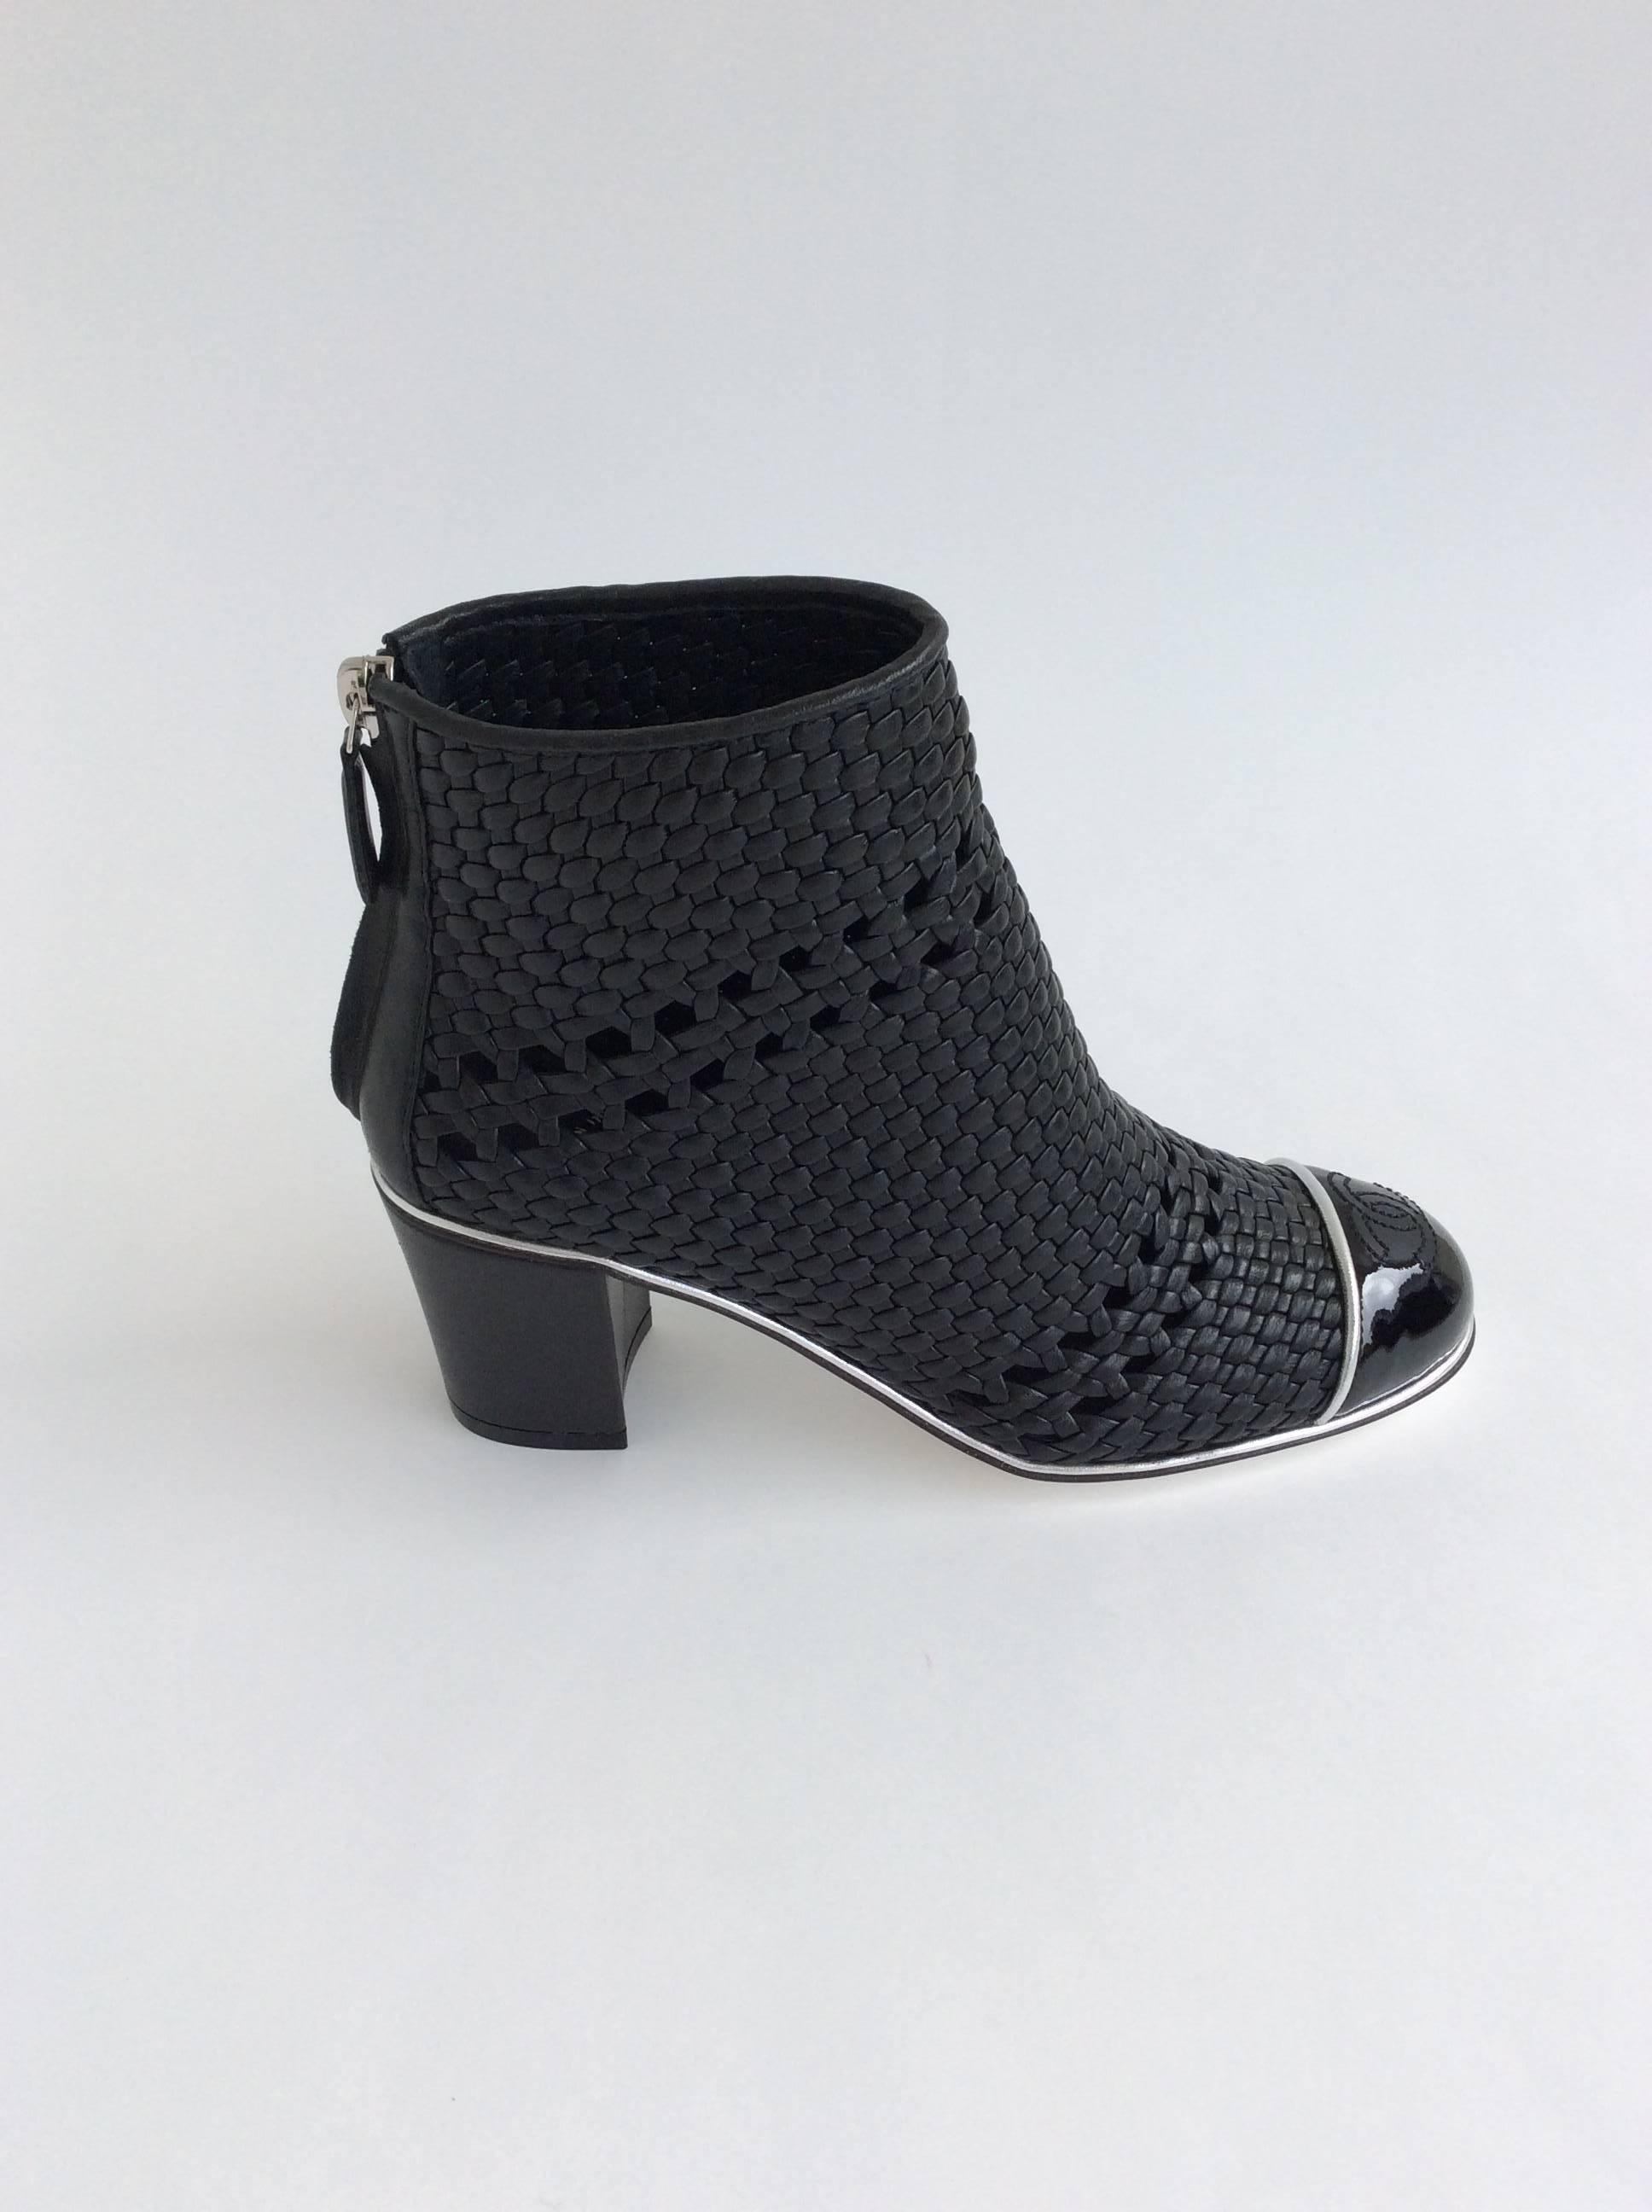 Chanel black woven leather booties with black patent leather “CC” on toes, silver trim throughout and chunky leather heel. Zippered closure at back. 

Sizing: Fr37.5, Us7.5

Heel height: 2.5 inches 